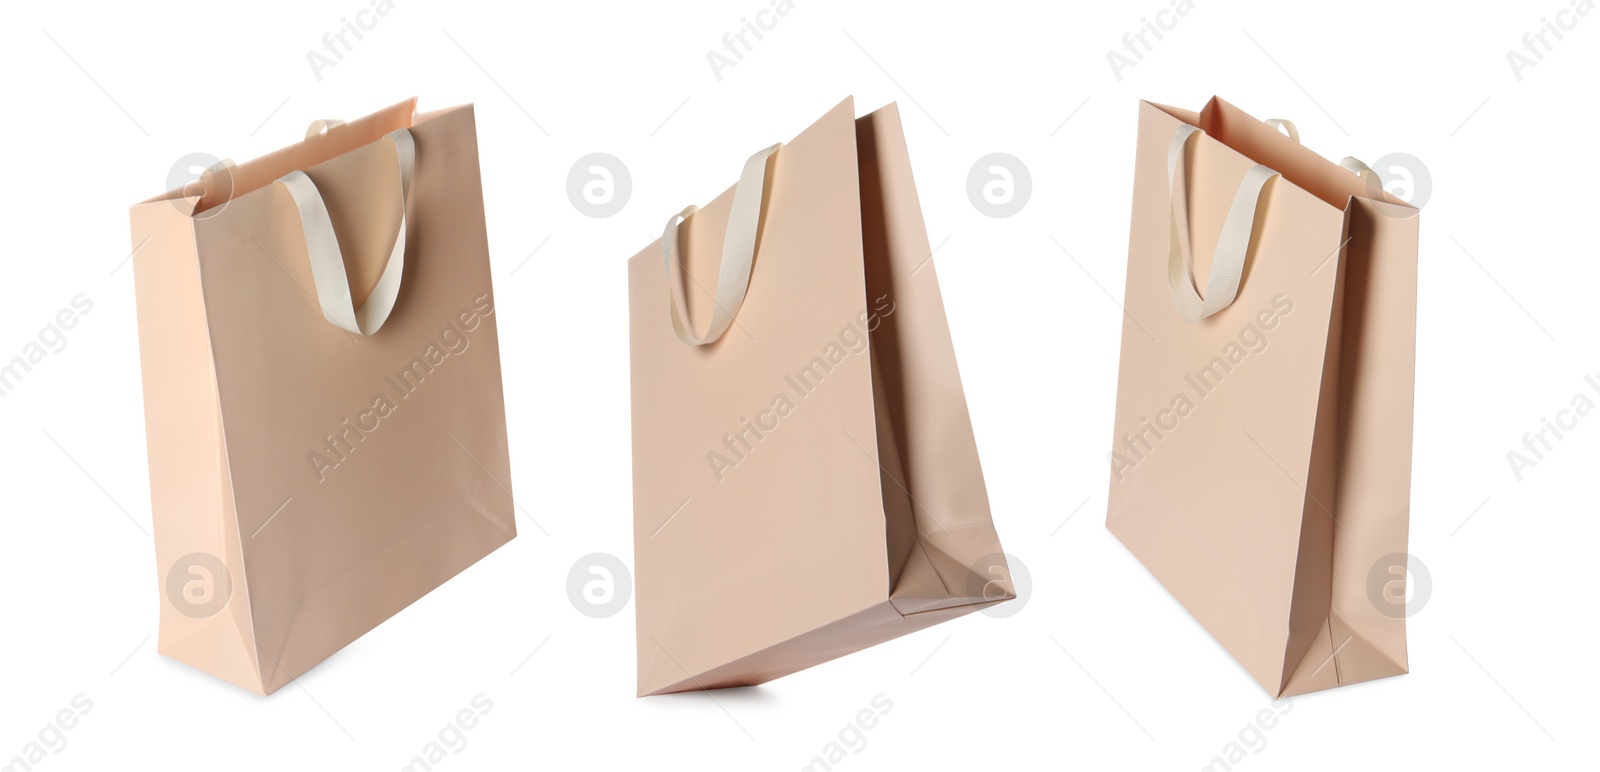 Image of Beige shopping bag isolated on white, different sides